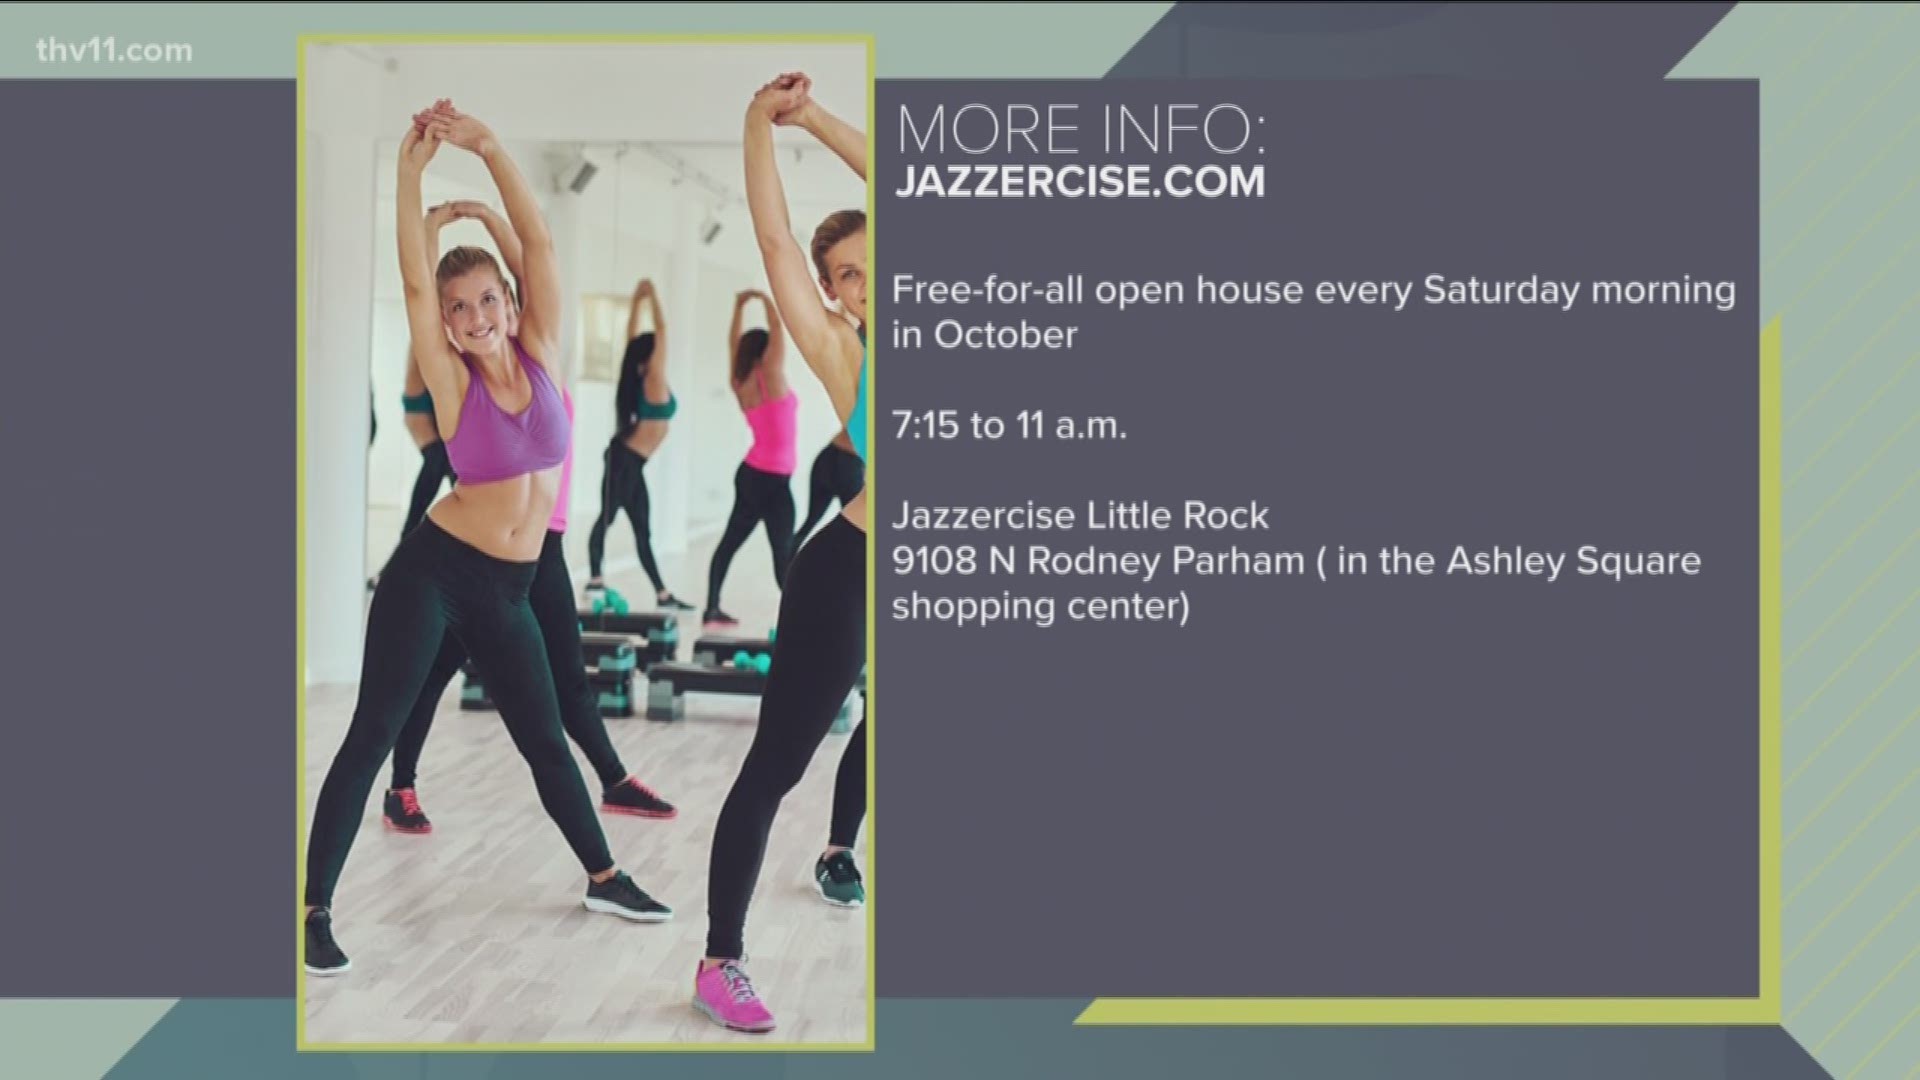 Celebrate the 50th anniversary of Jazzercise with free classes!